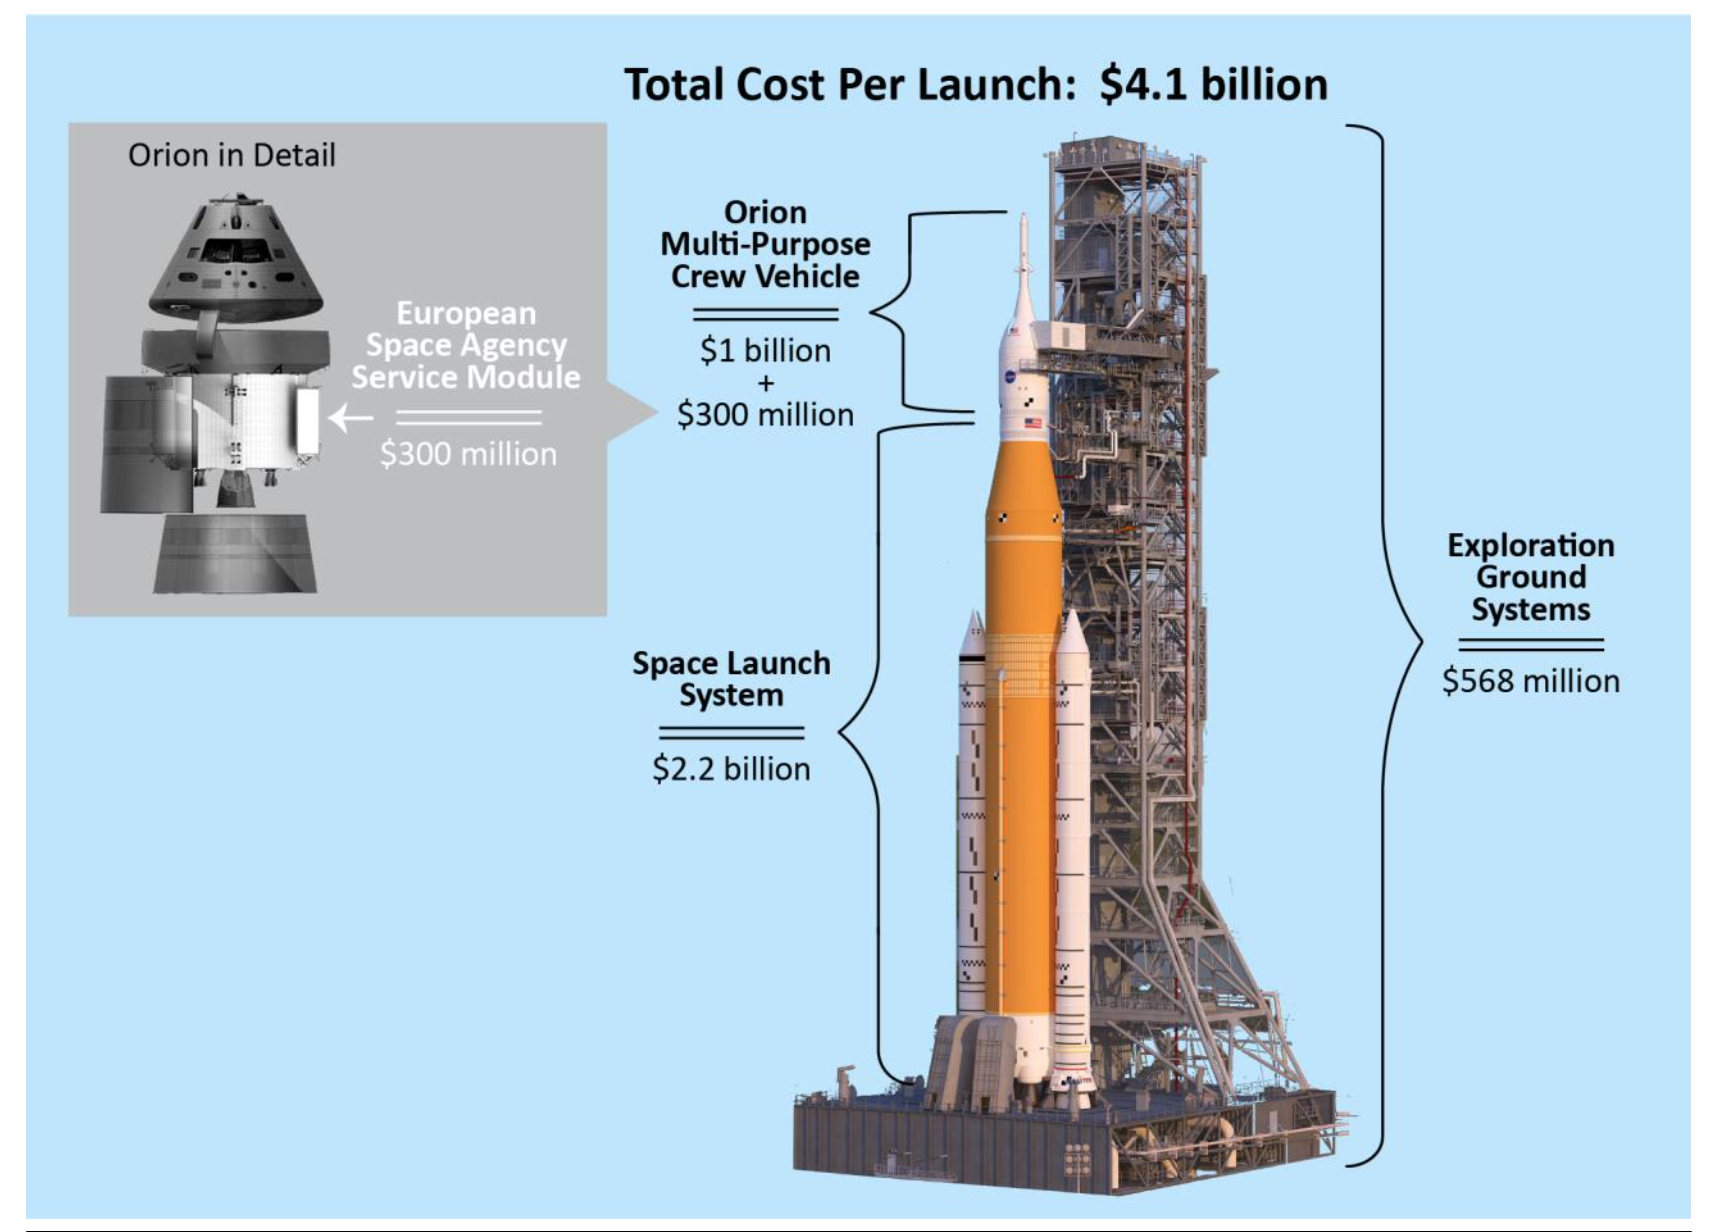 the estimated cost of SLS and Orion per launch